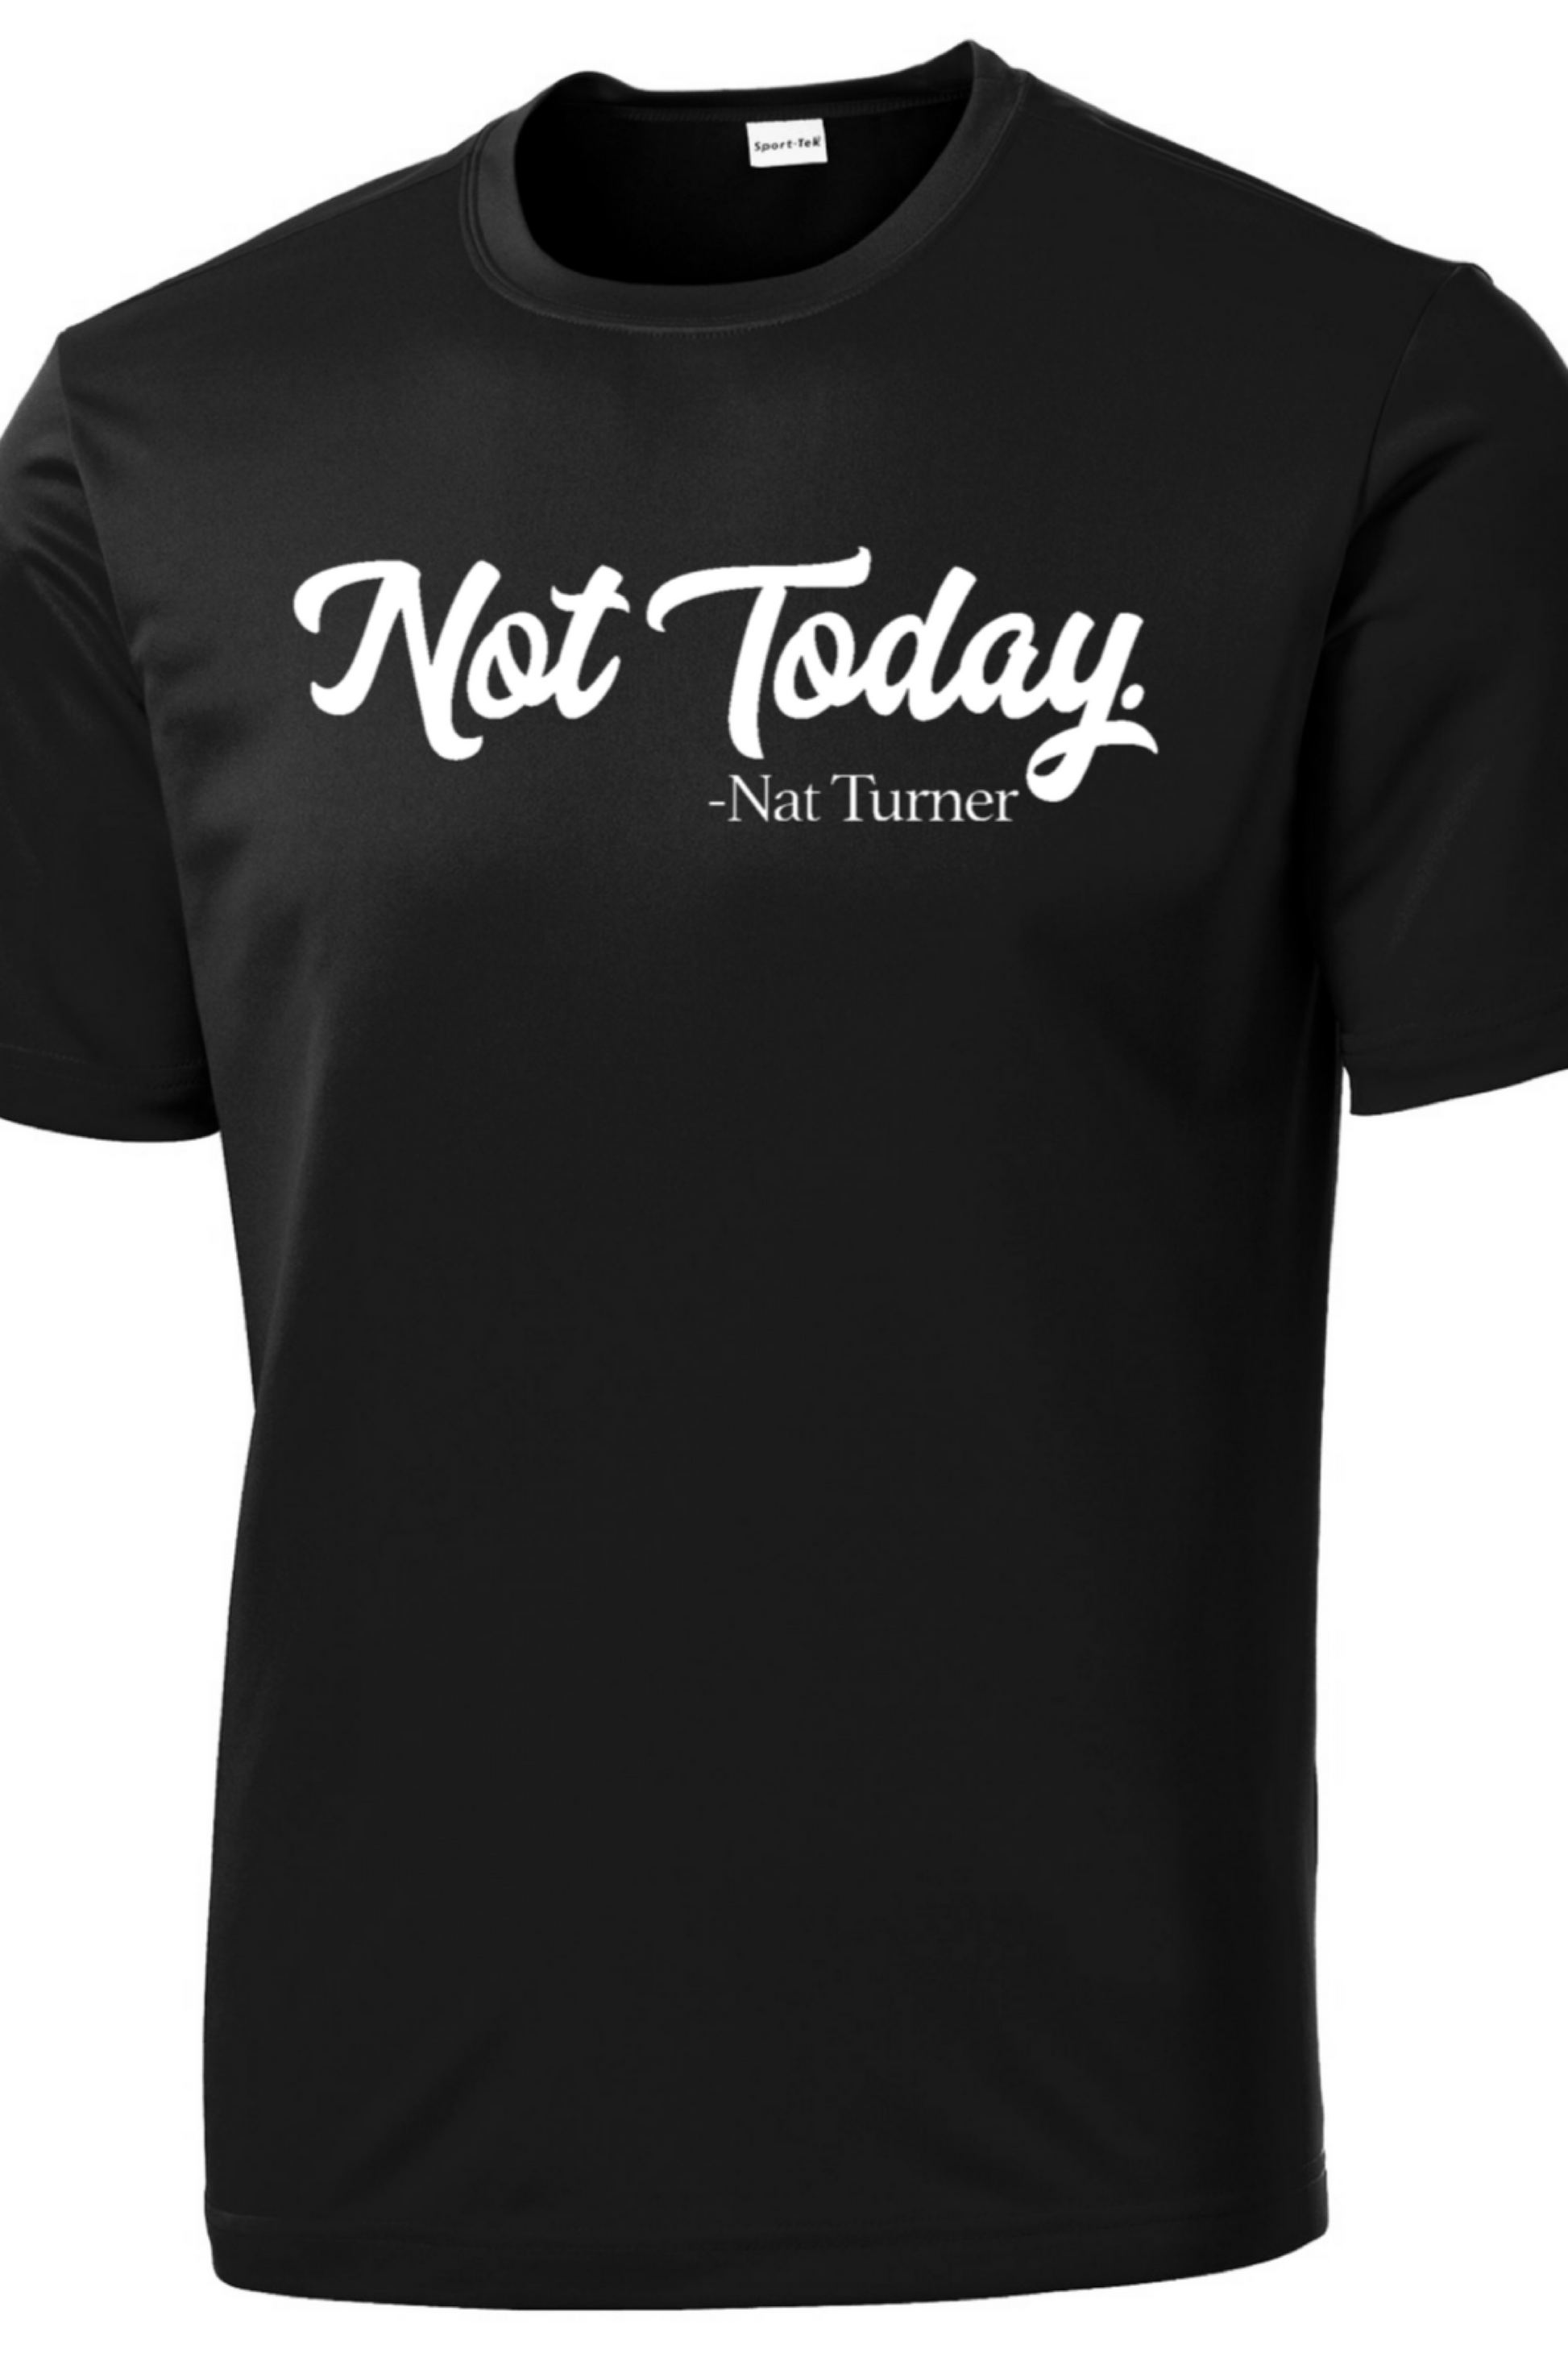 Mens Black Not Today T-shirt for Black History Month 